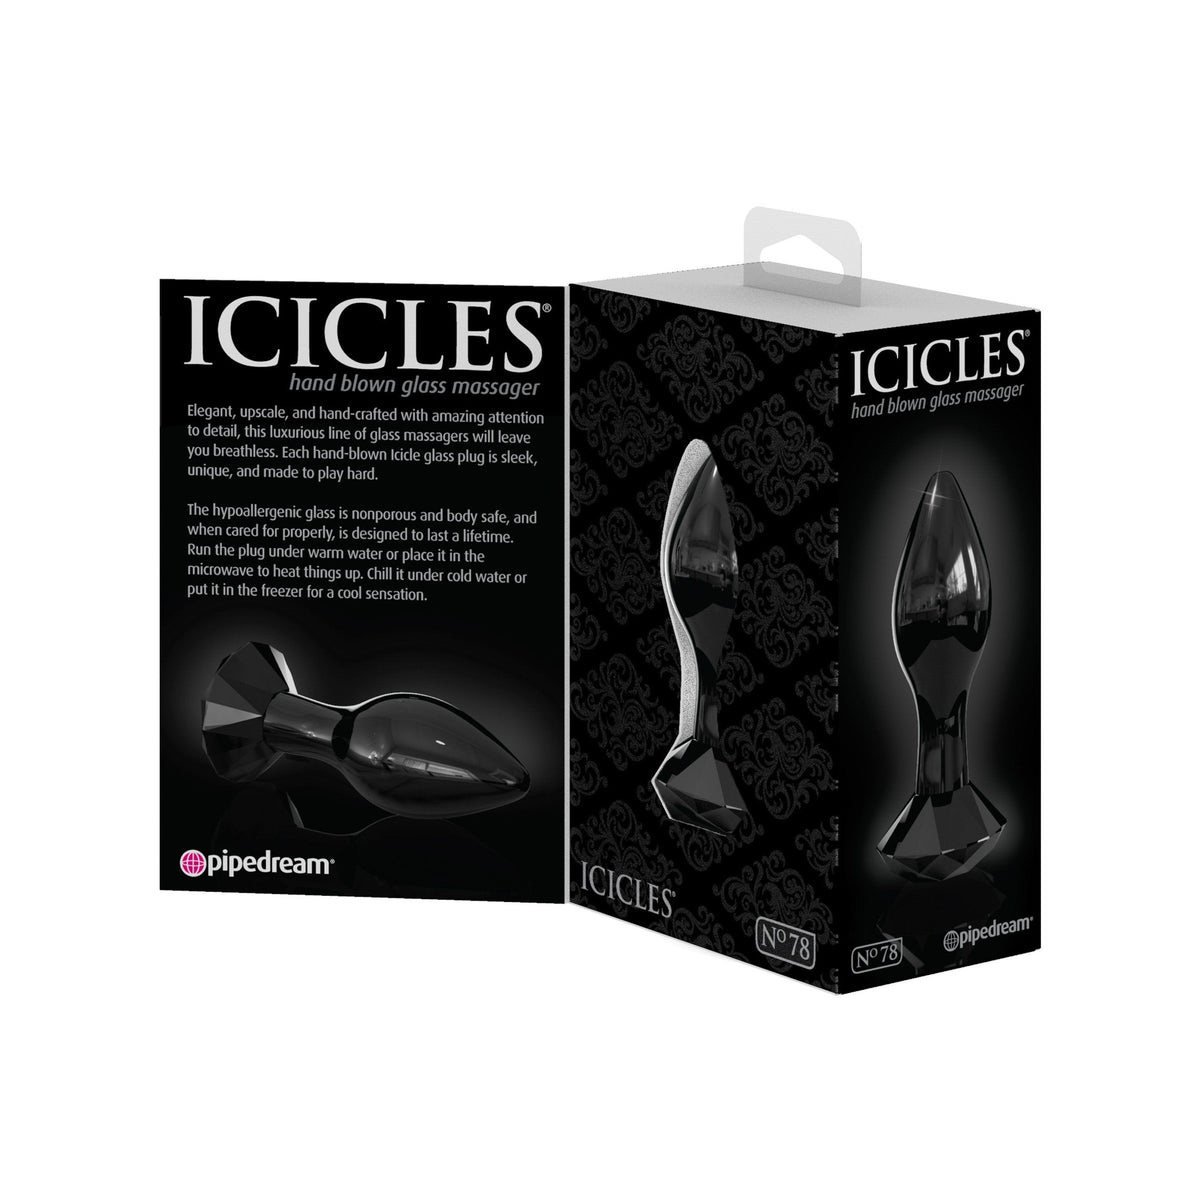 Pipedream - Icicles No 78 Hand Blown Massager (Black) PD1660 CherryAffairs